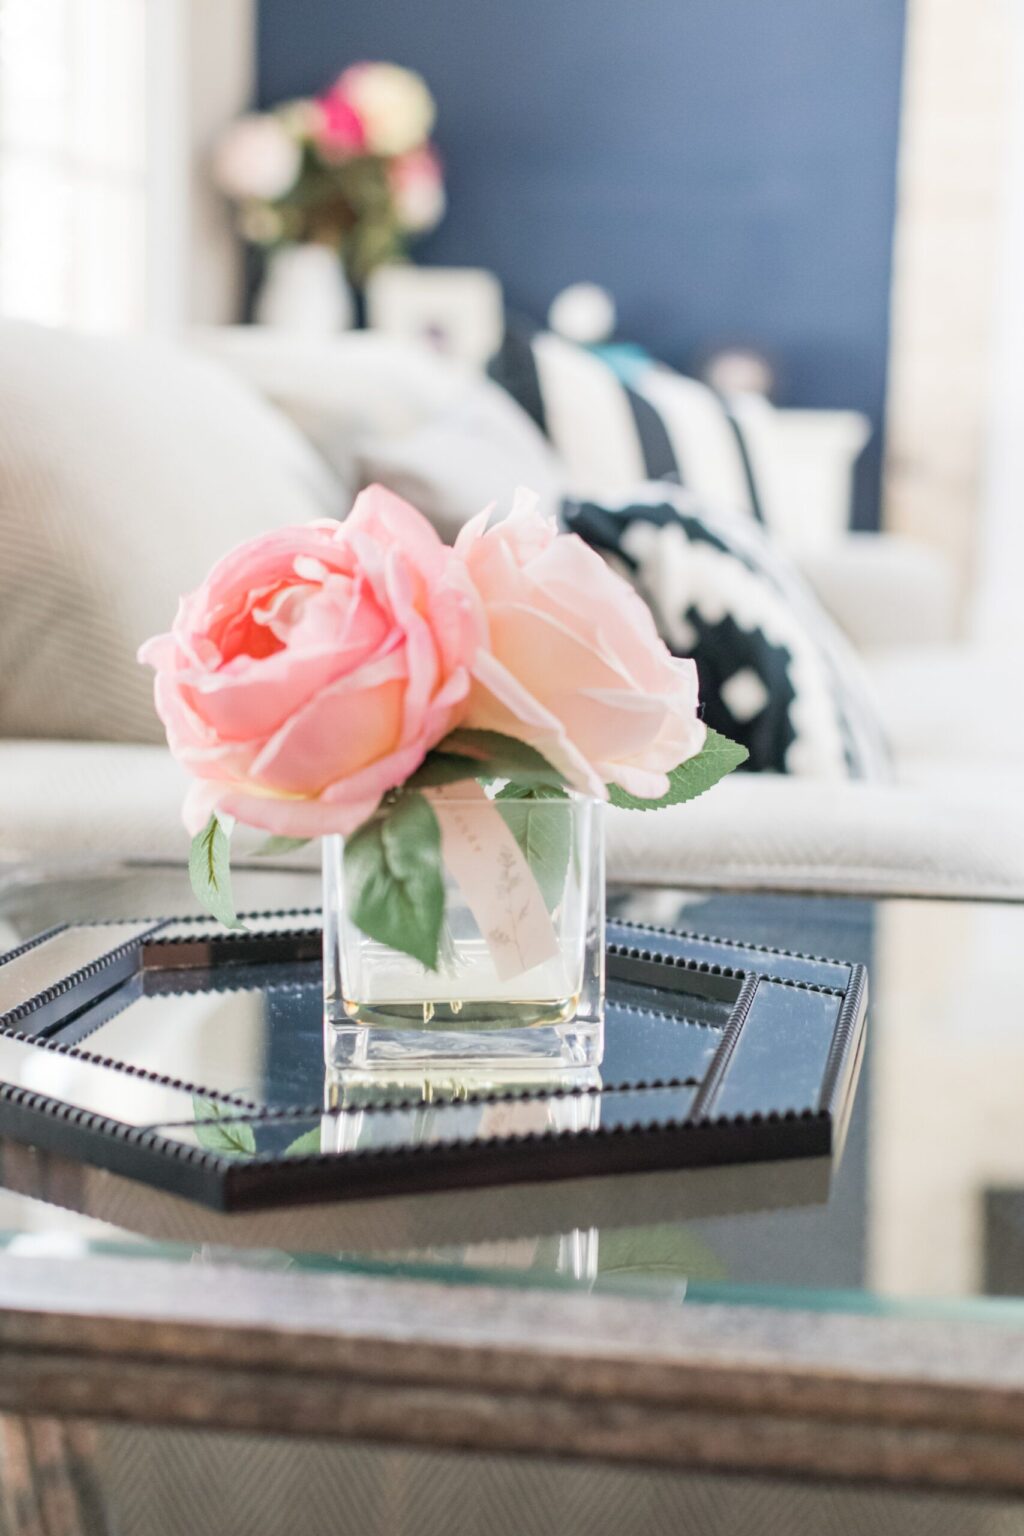 10 Tips For Decorating Your Coffee Table